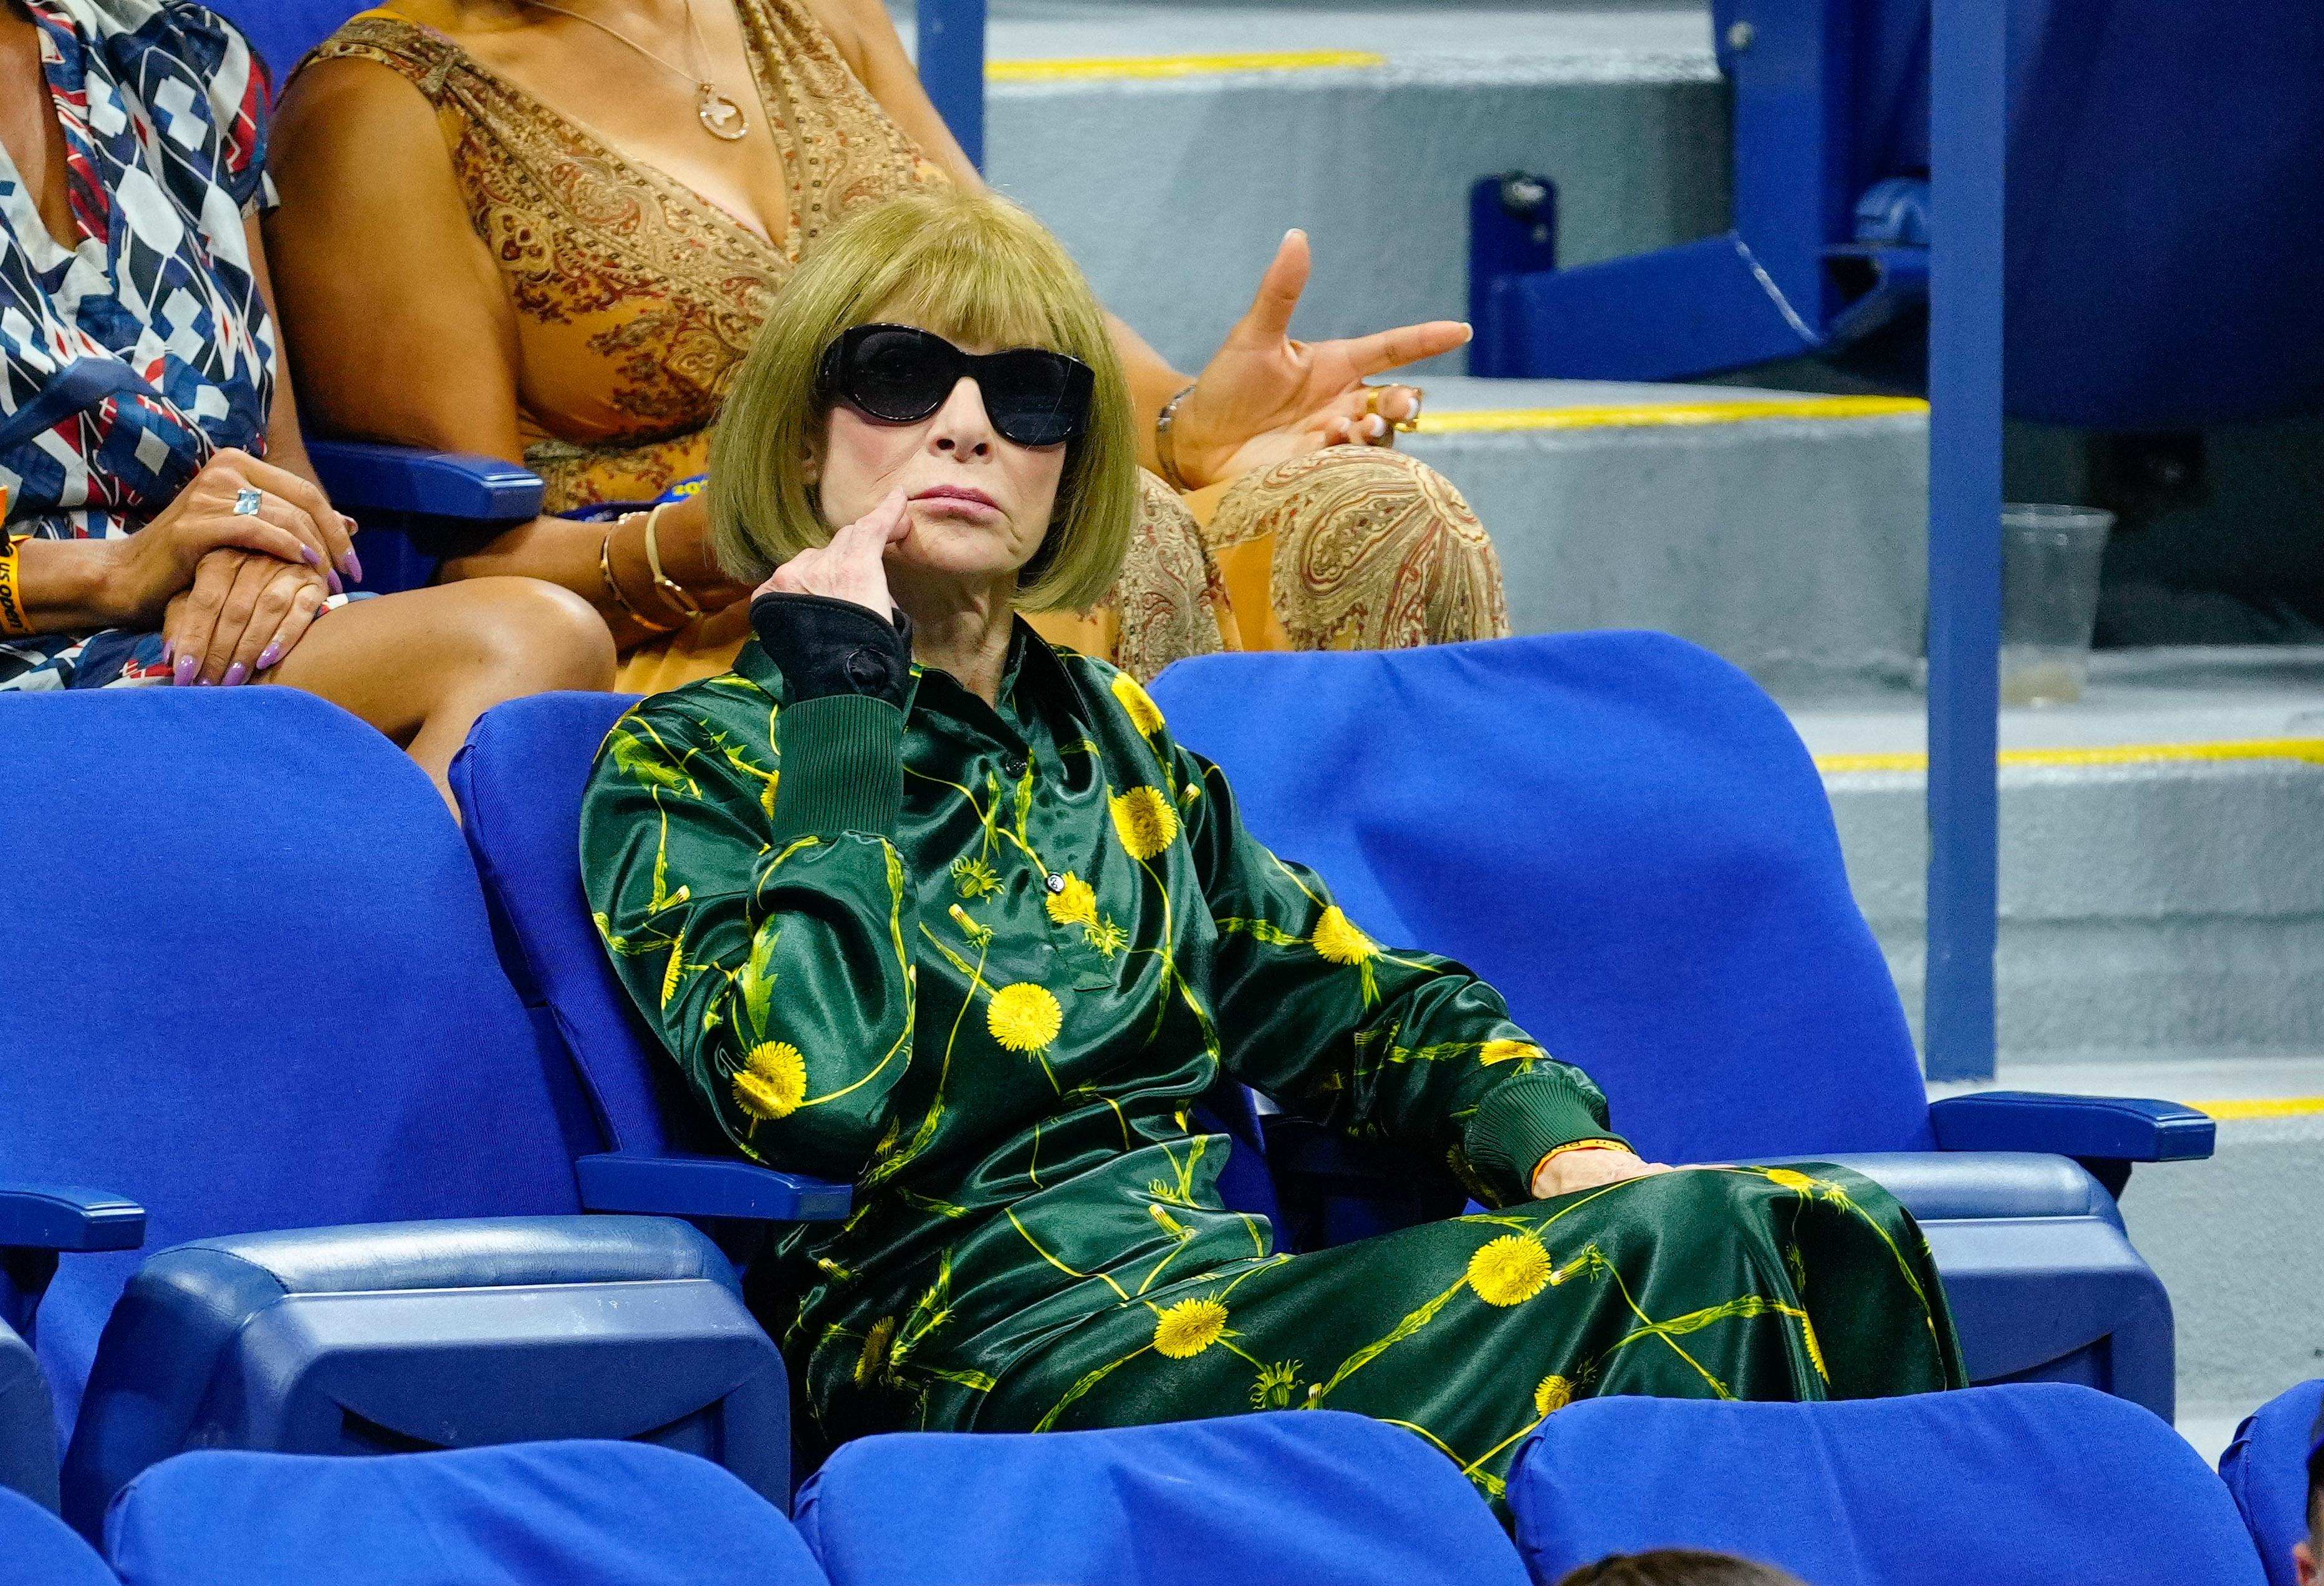 Anna Wintour in her iconic sunglasses